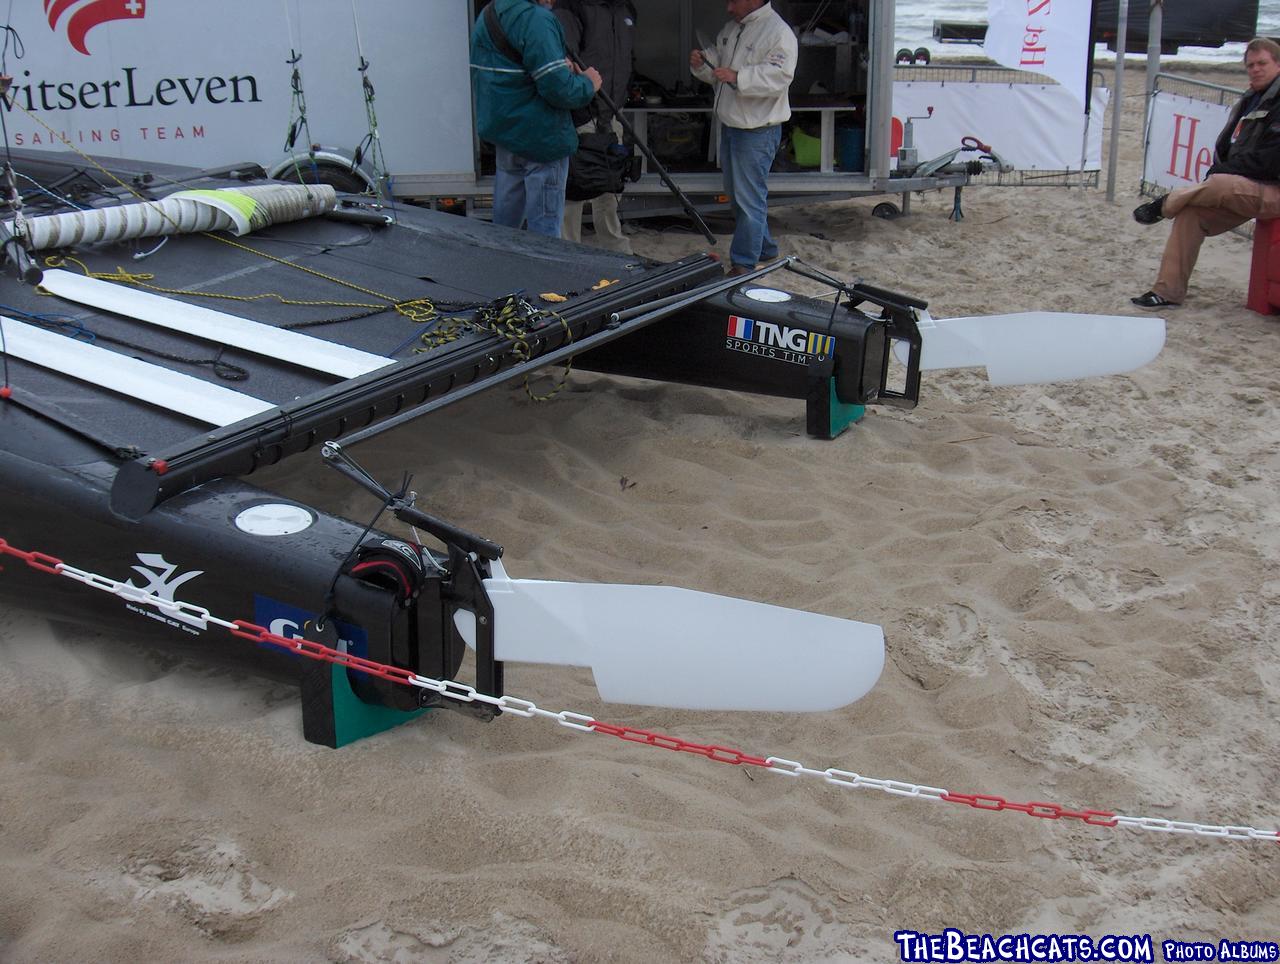 Its hard to tell from the pictures if its wider than the standard Hobie Fox.